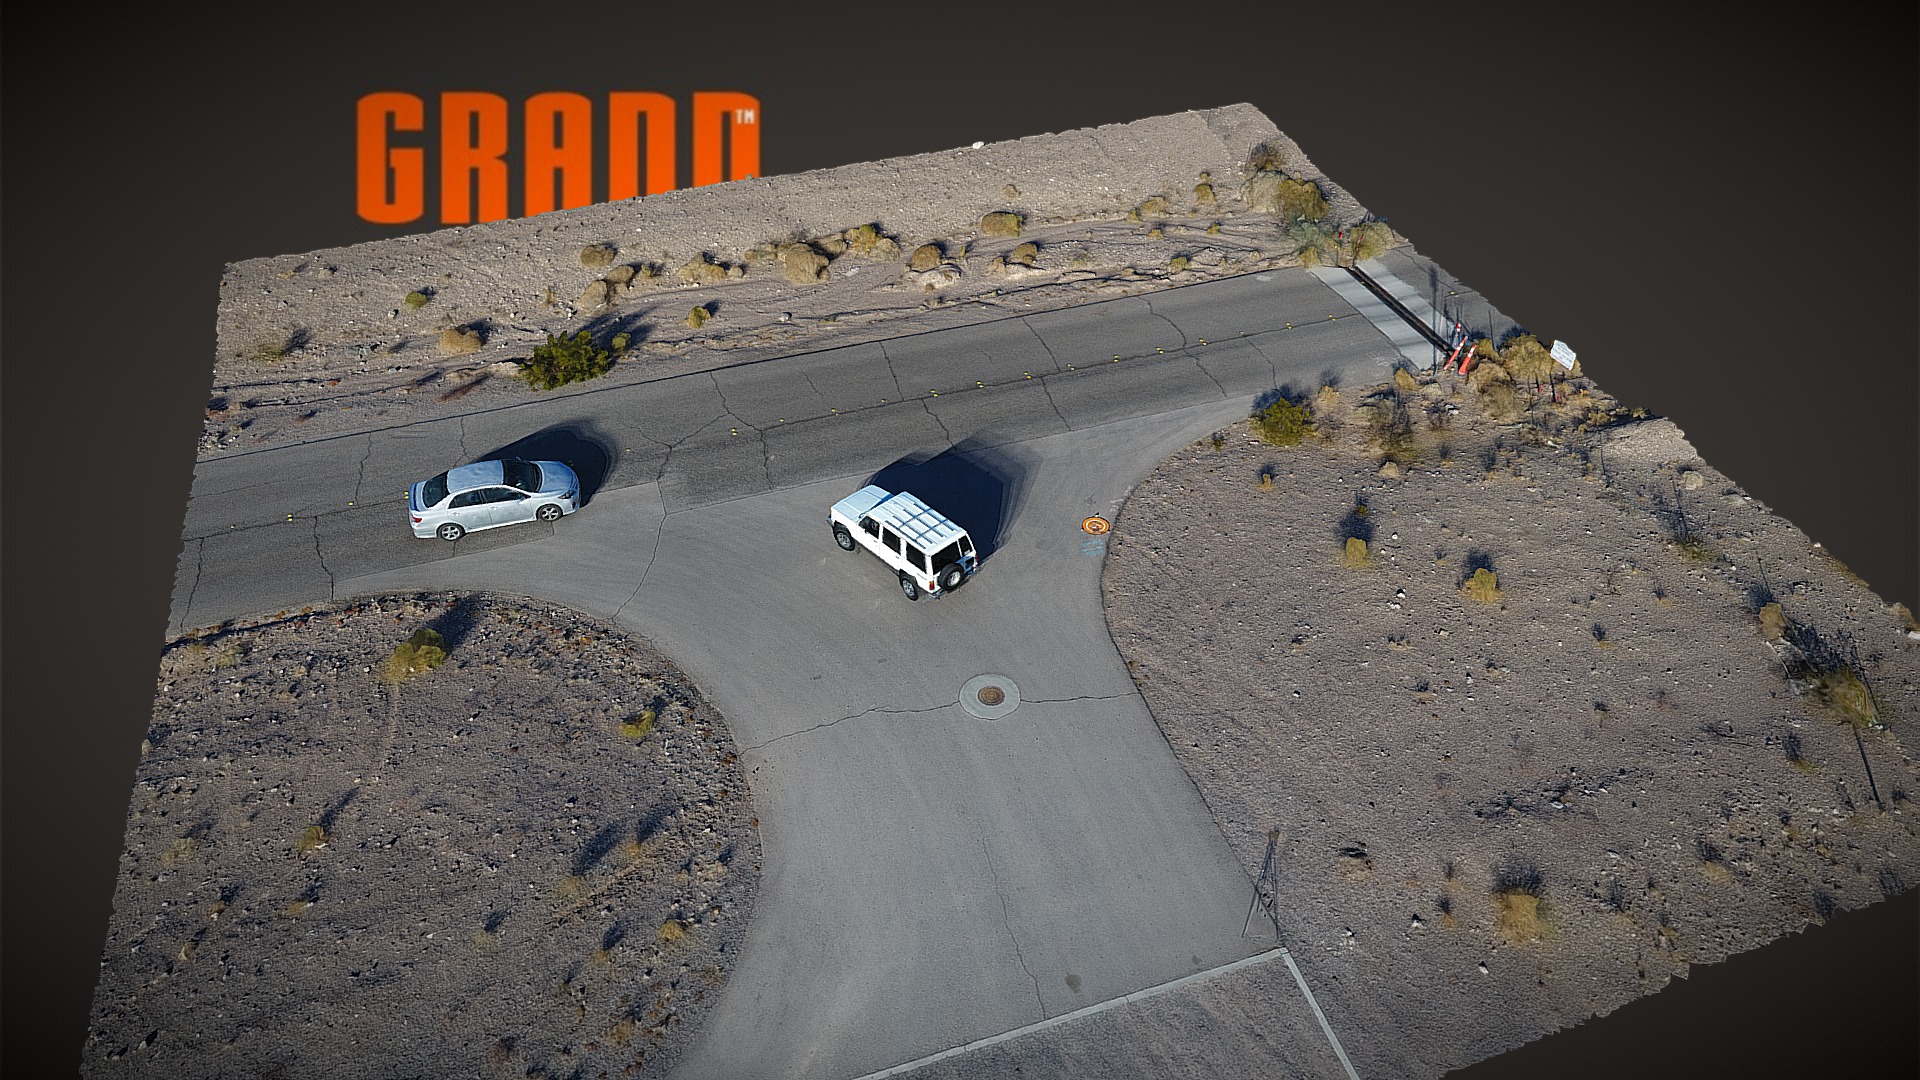 3D model GRADD 3D Model / Traffic Accident Reconstruction - This is a 3D model of the GRADD 3D Model / Traffic Accident Reconstruction. The 3D model is about a road with cars and people on it.